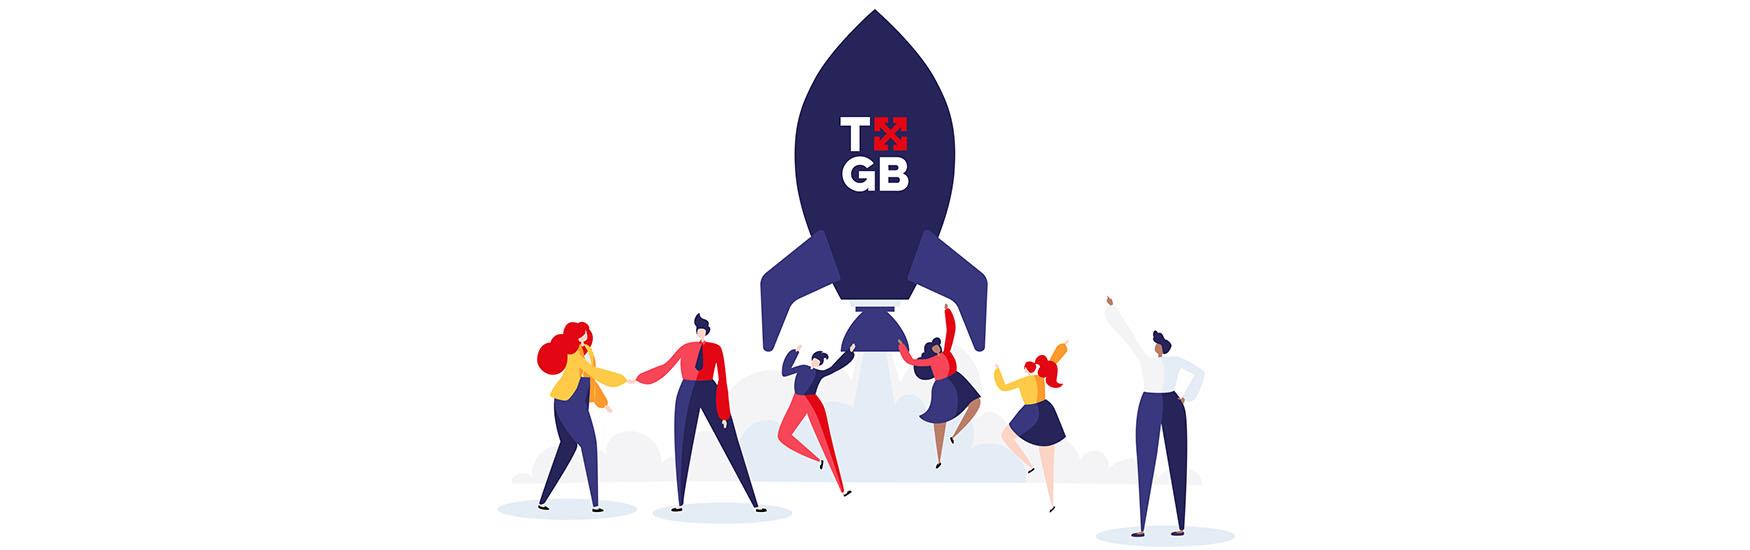 Six human cartoon figures celebrating the take-off of a blue rocket with the TXGB logo on.